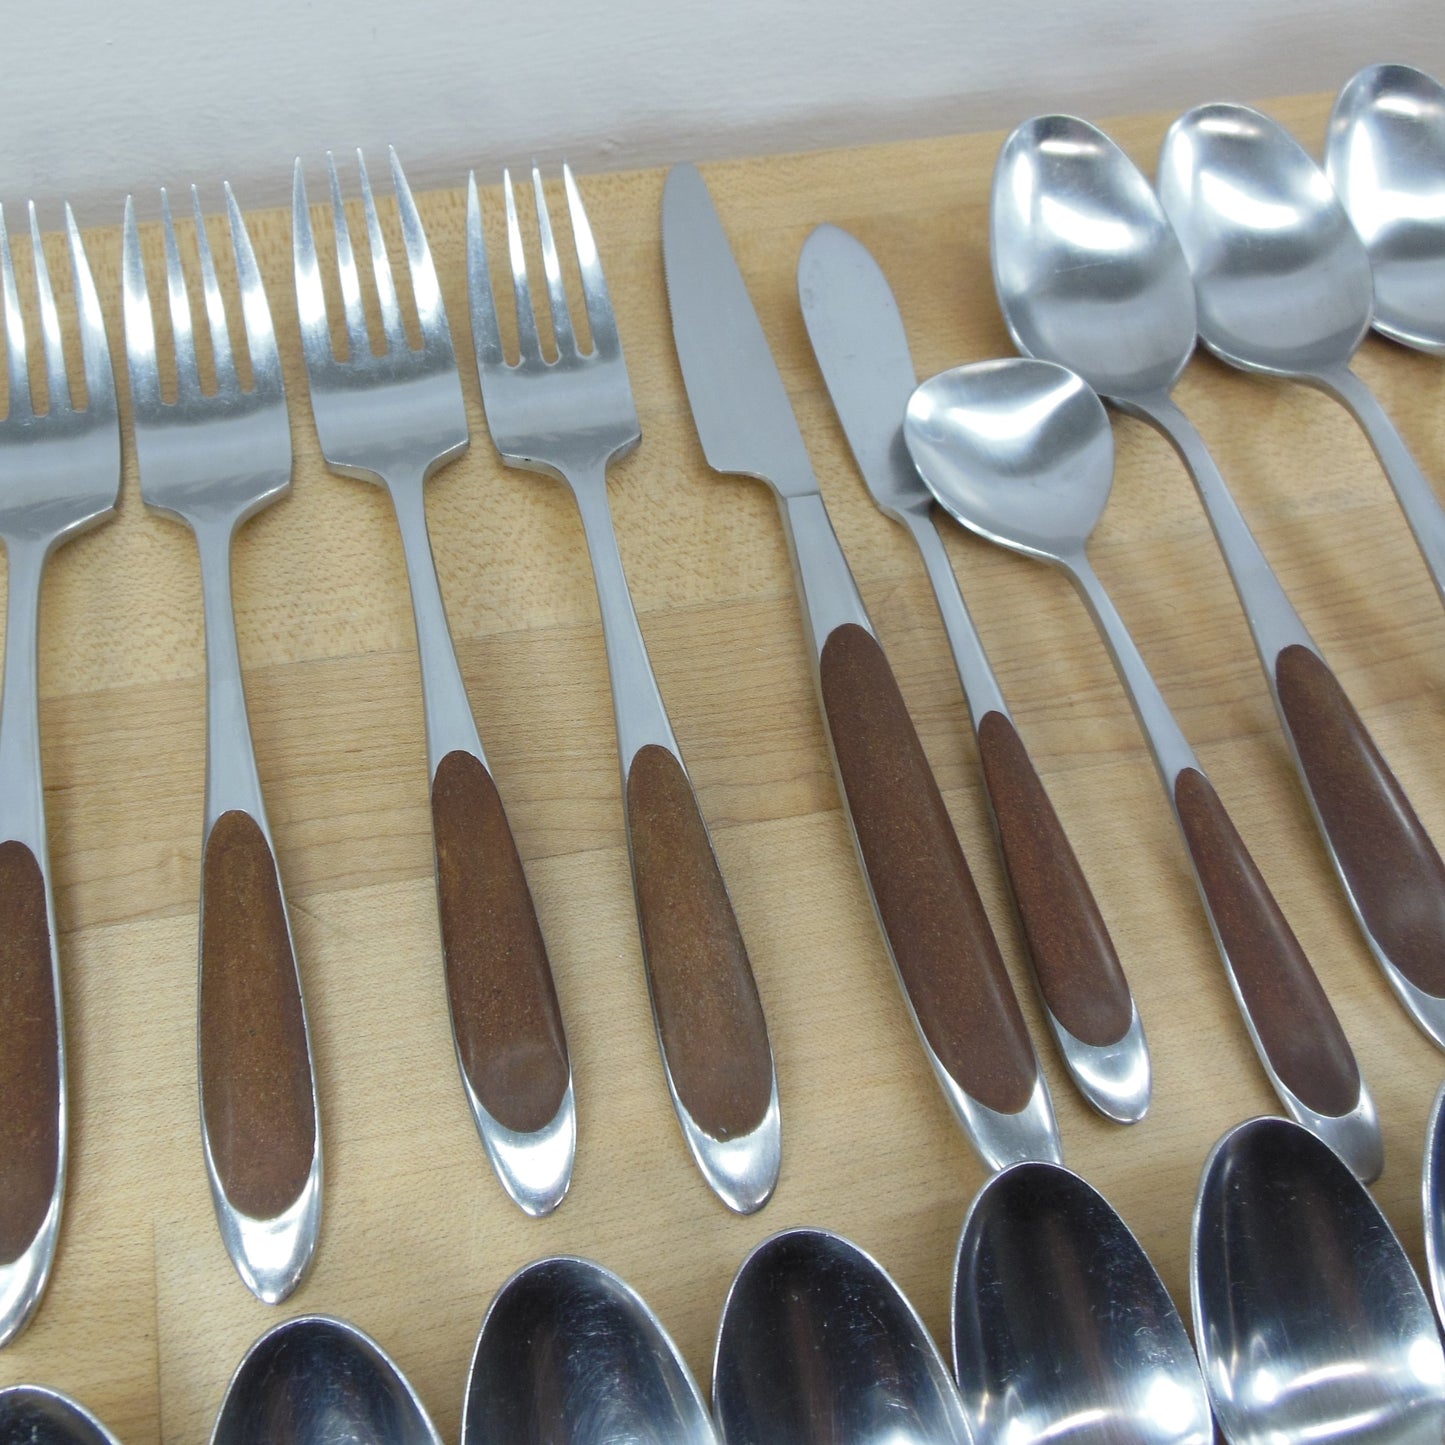 Unknown Maker Japan Stainless Flatware Brown Canoe Composite Handles 22 Pieces used